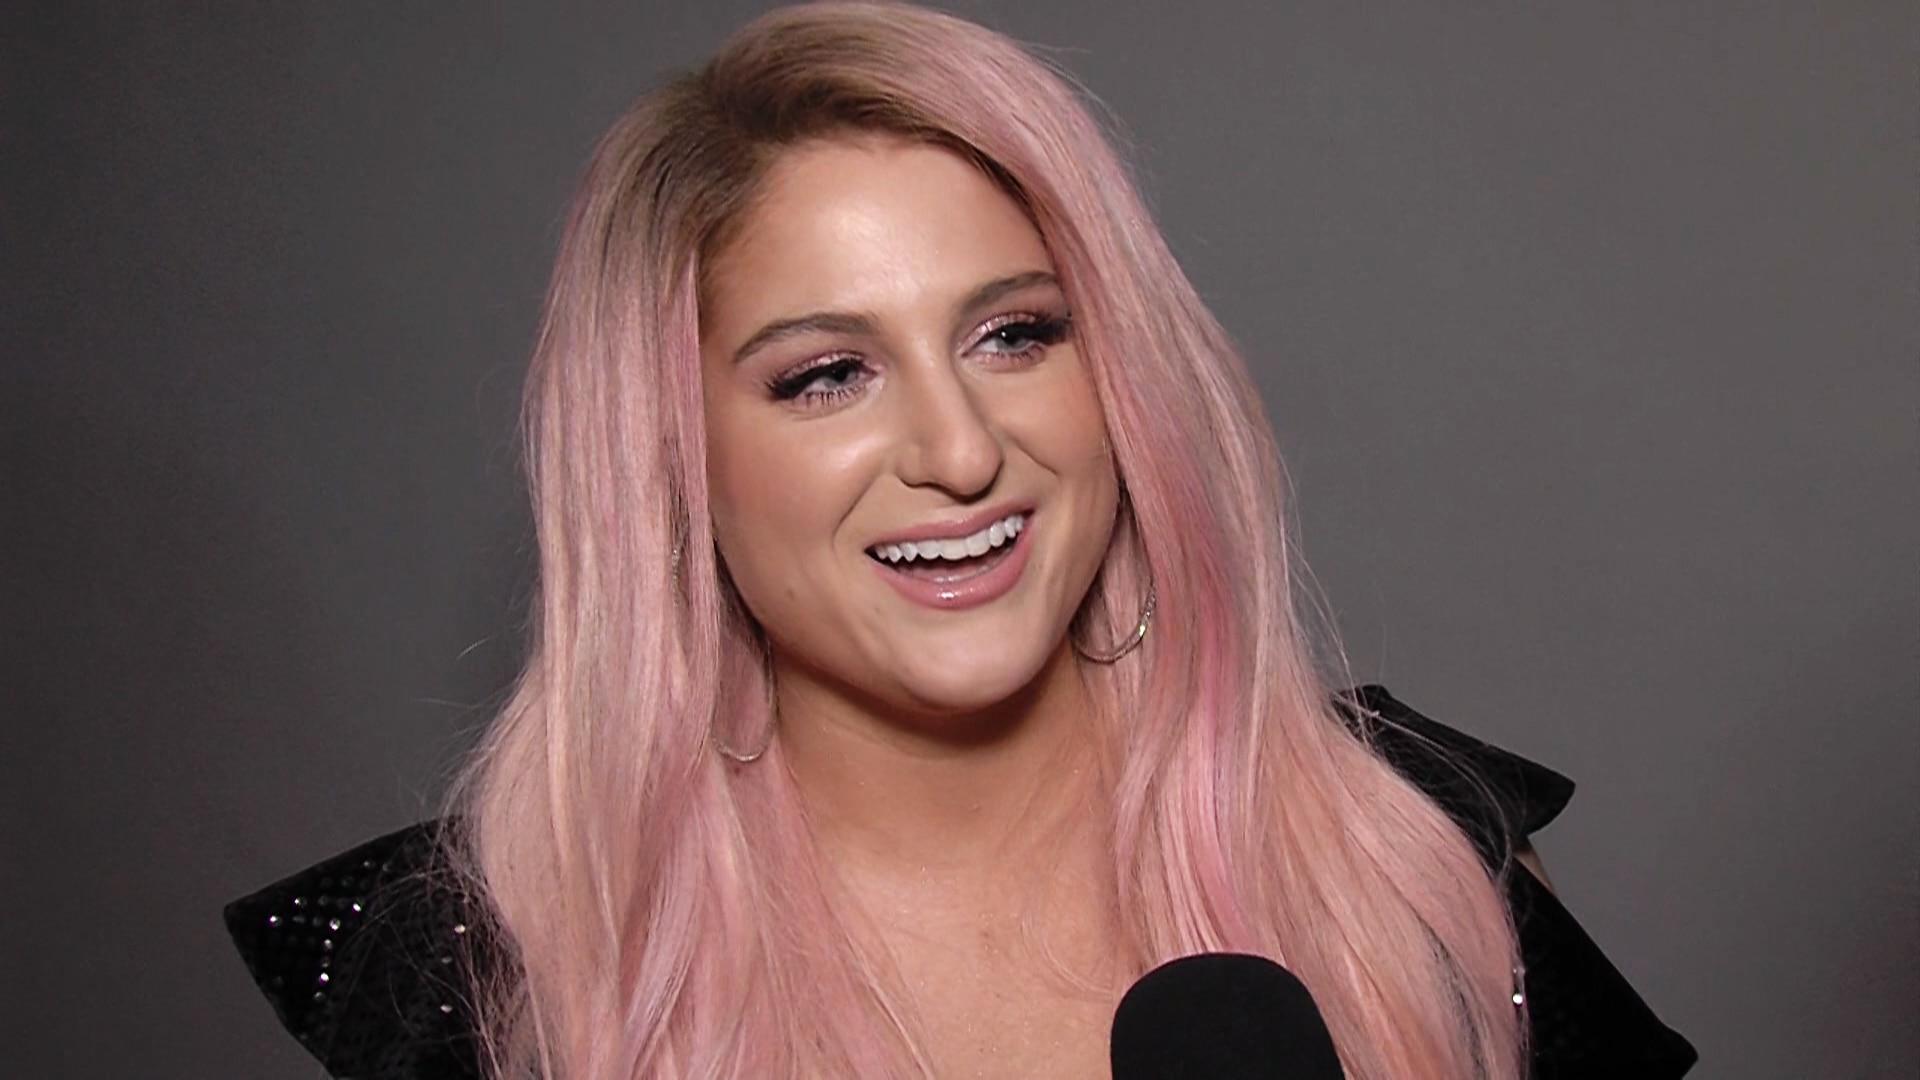 Meghan Trainor Shares Her Holiday Plans: 'I'm Gettin' Marrie...